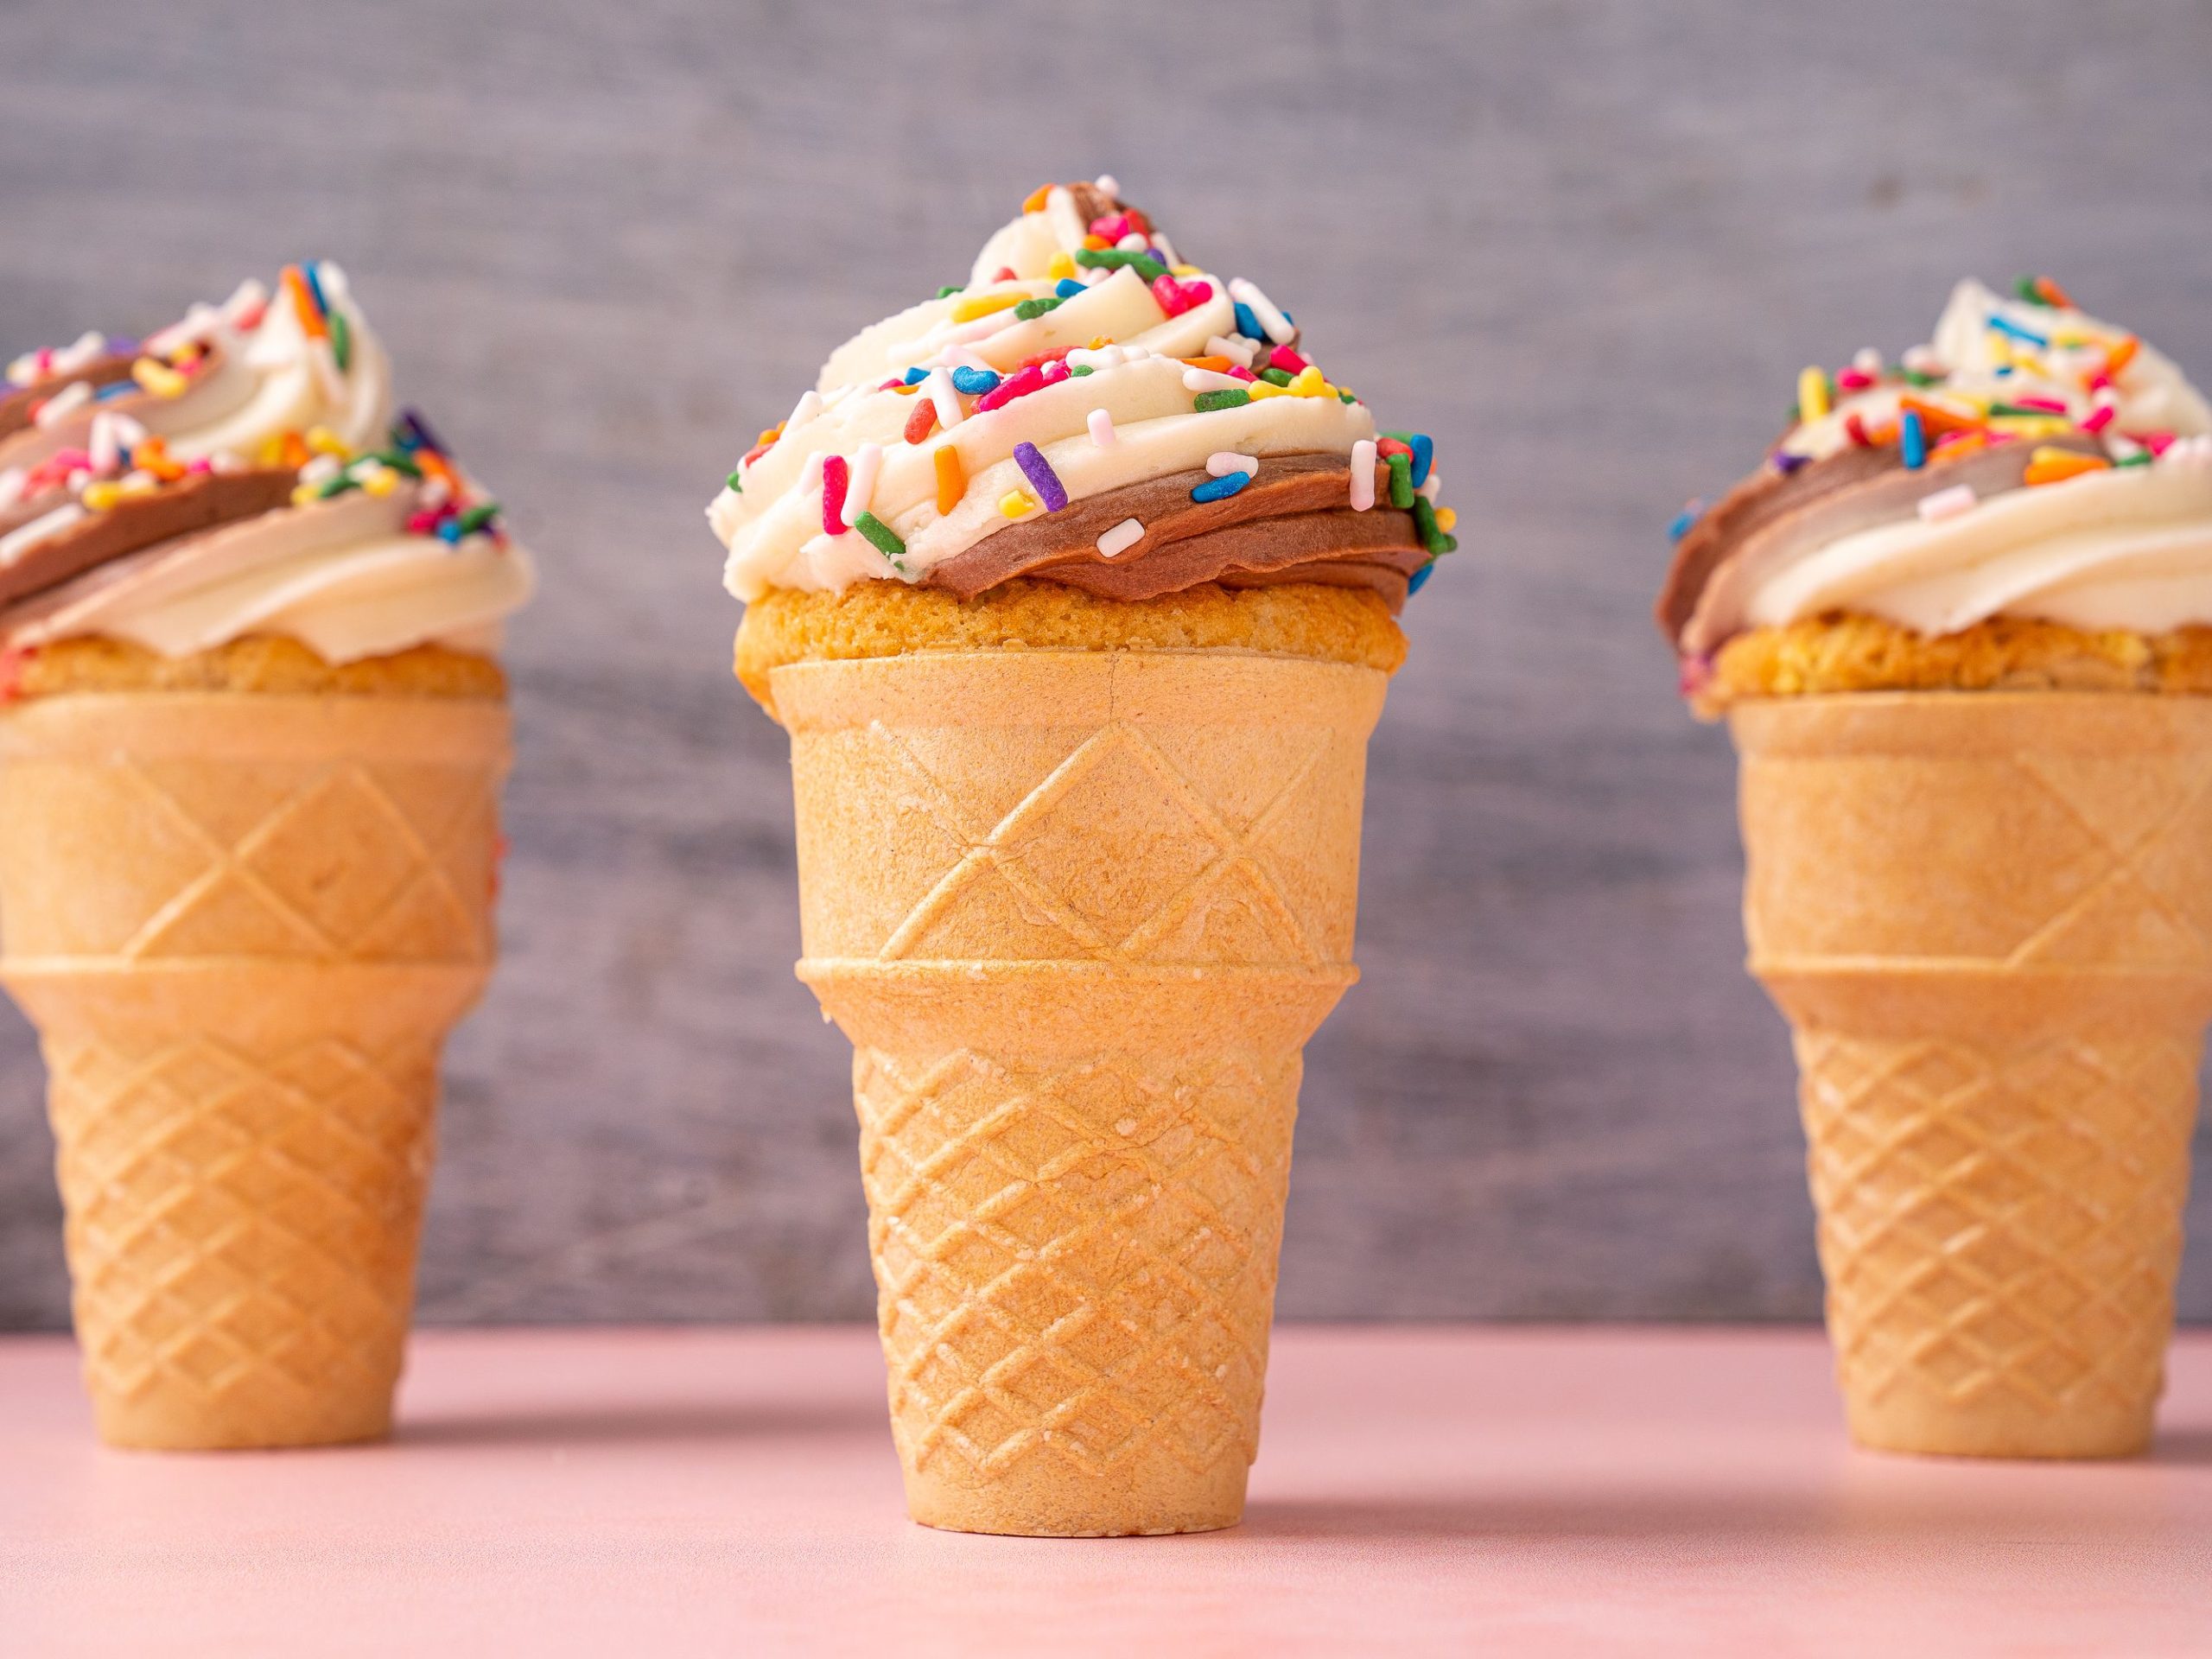 Apartments in San Antonio near Six Flags Fiesta In celebration of National Ice Cream Cone Day, indulge in three delicious ice cream cones topped with delightful frosting and sprinkles.